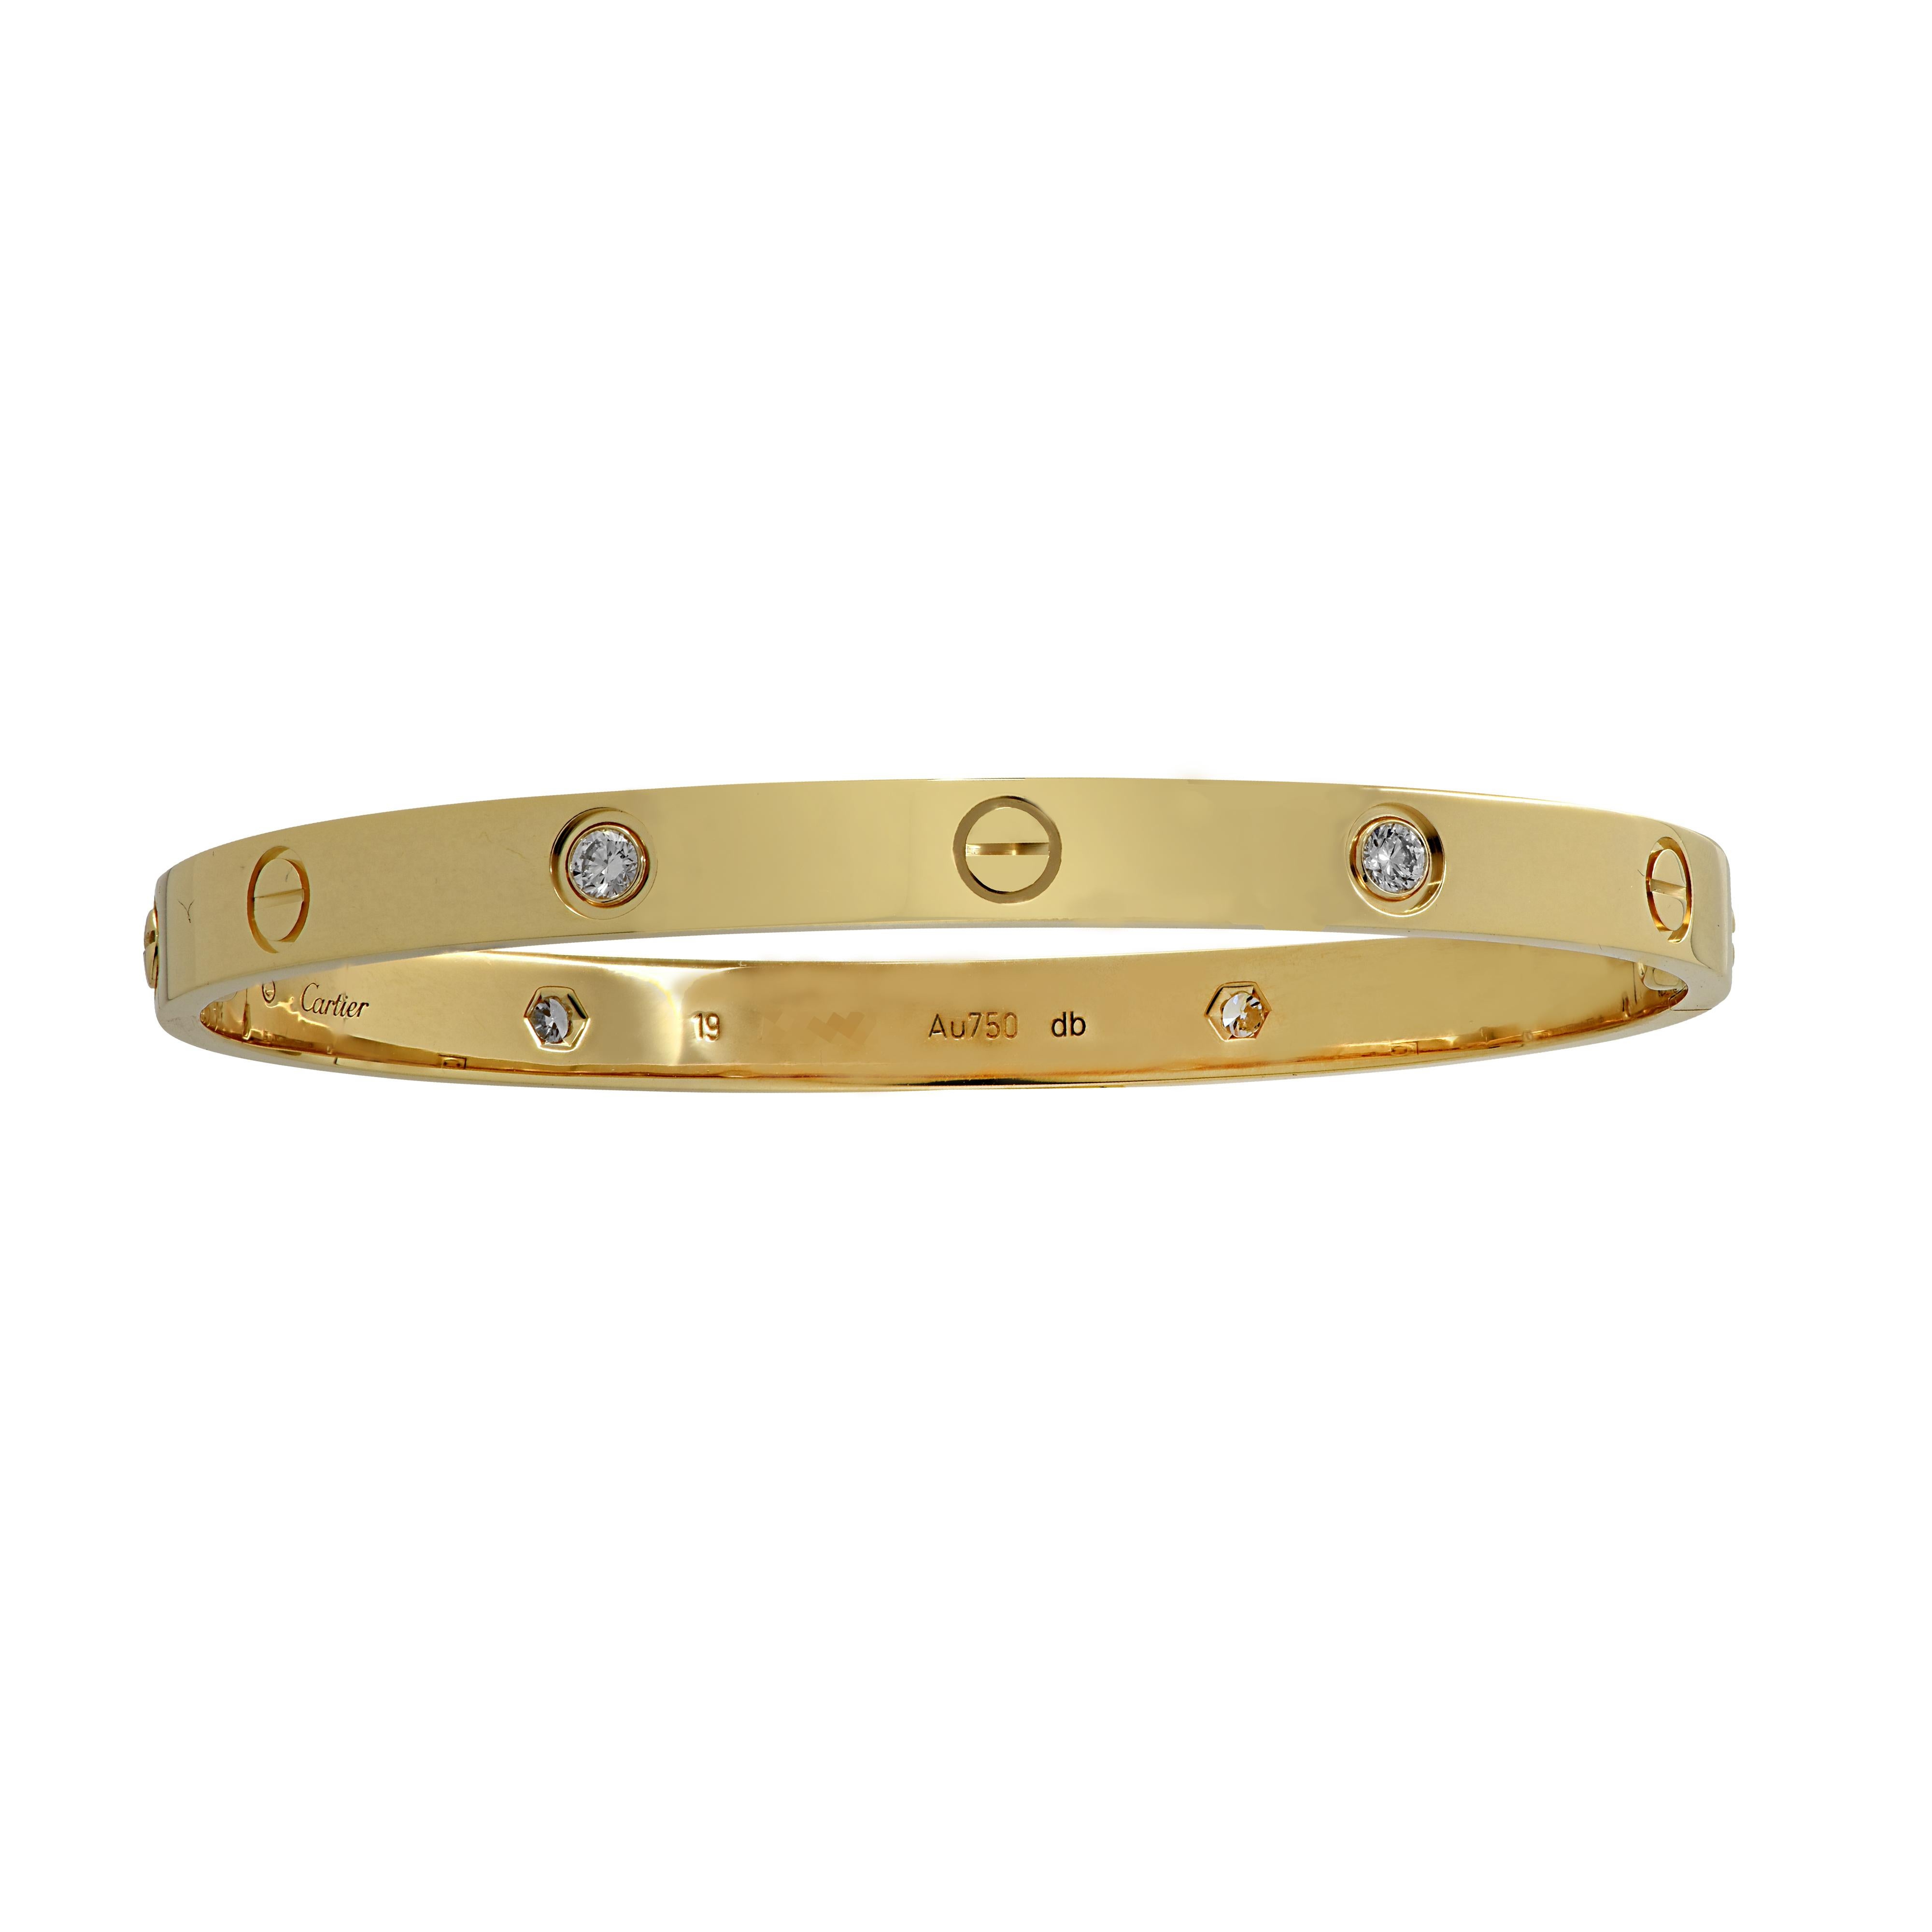 Cartier LOVE bracelet crafted in 18 Karat Yellow Gold, featuring 4 round brilliant cut diamonds weighing approximately .40 carats total. The Cartier love collection is a timeless tribute to the symbol of love that transcends through the decades in